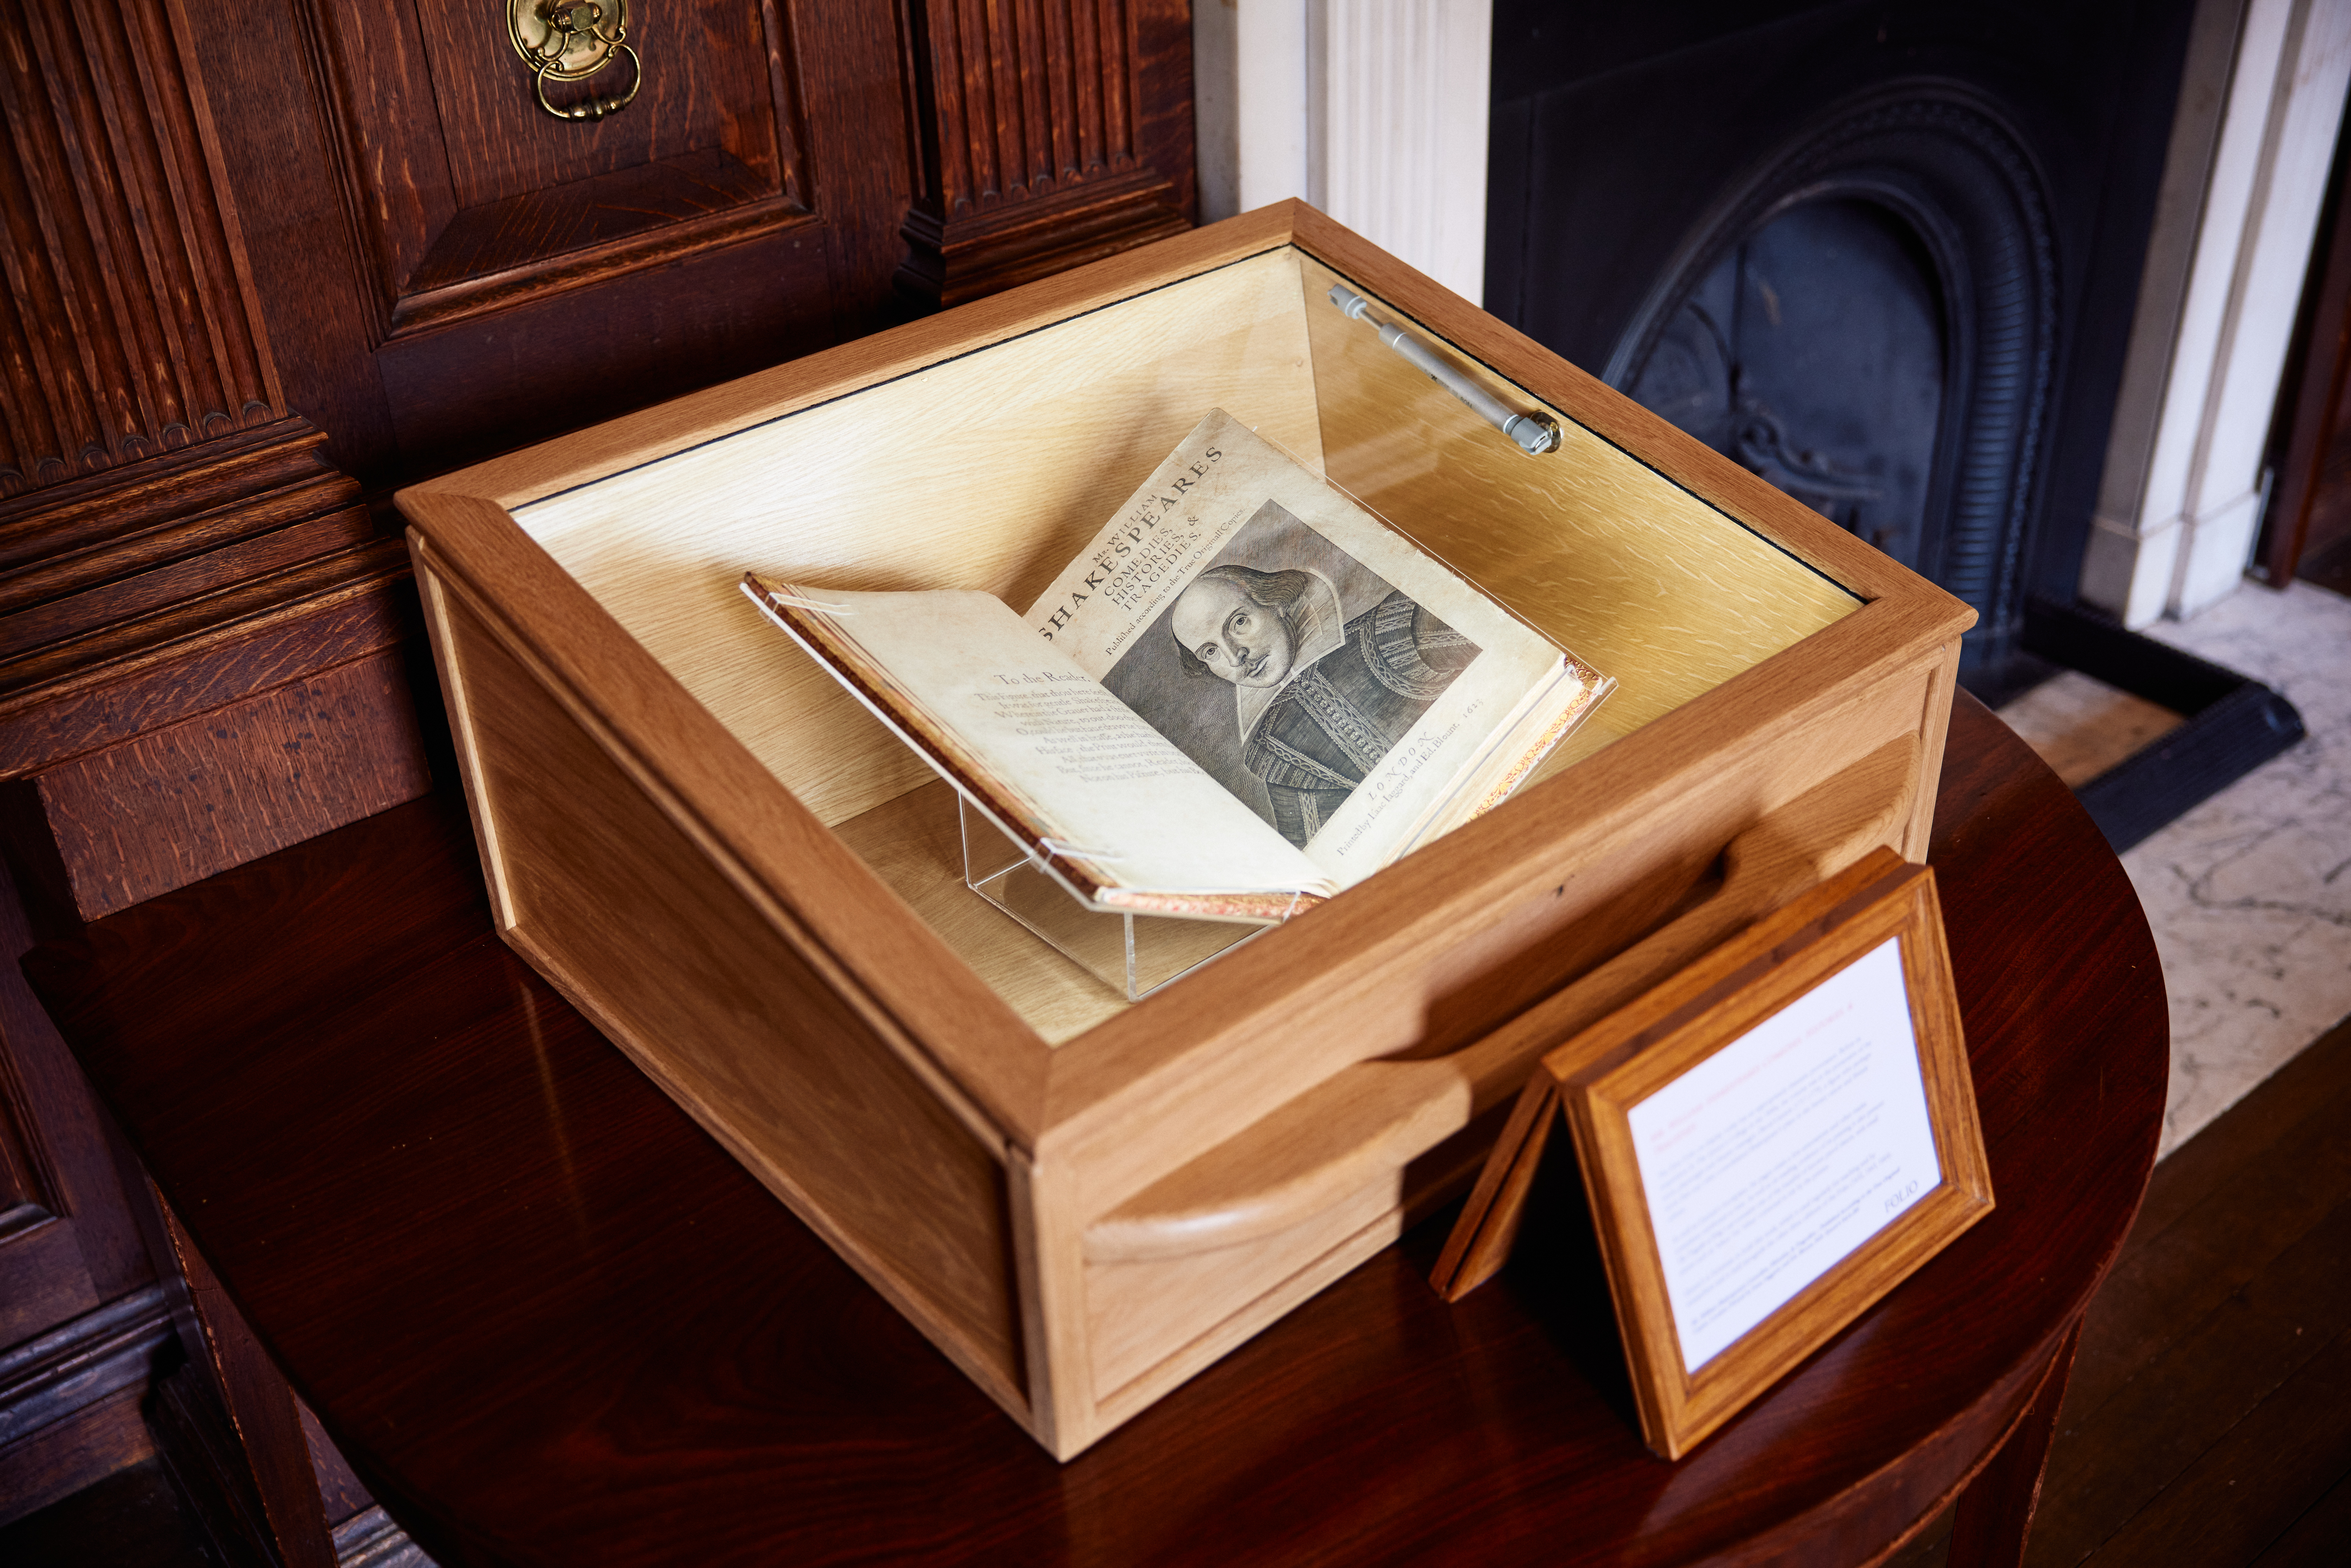 The bespoke wooden display case for the First Folio